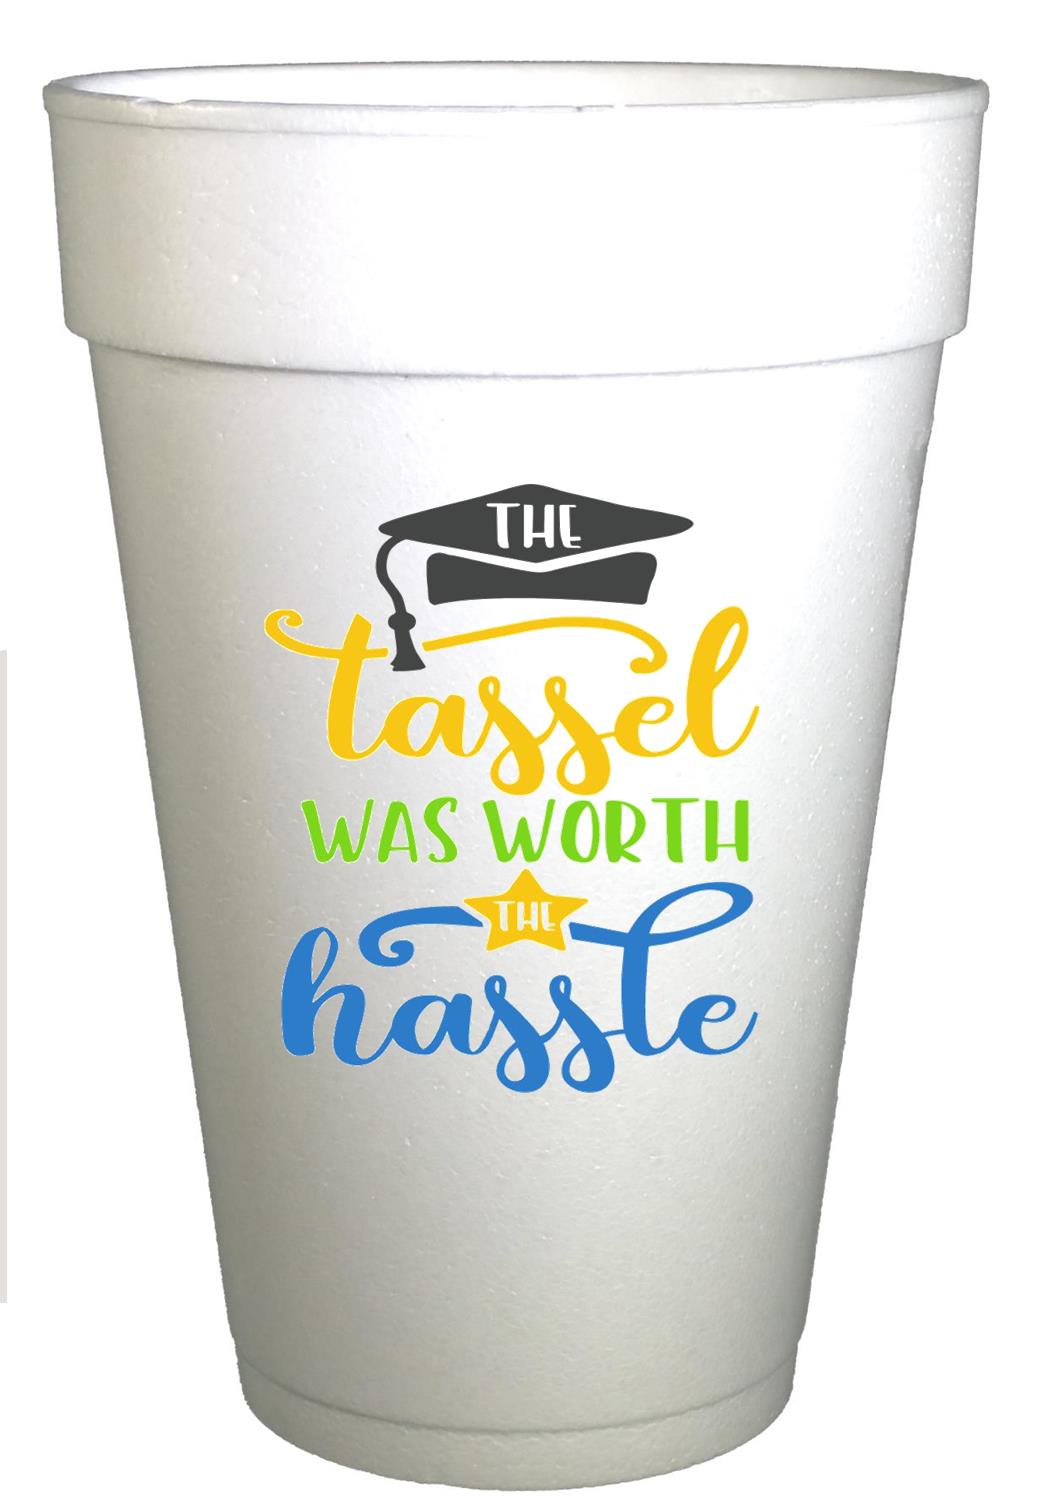 styrofoam cups with brightly colored tassell is worth the hassle saying on cups